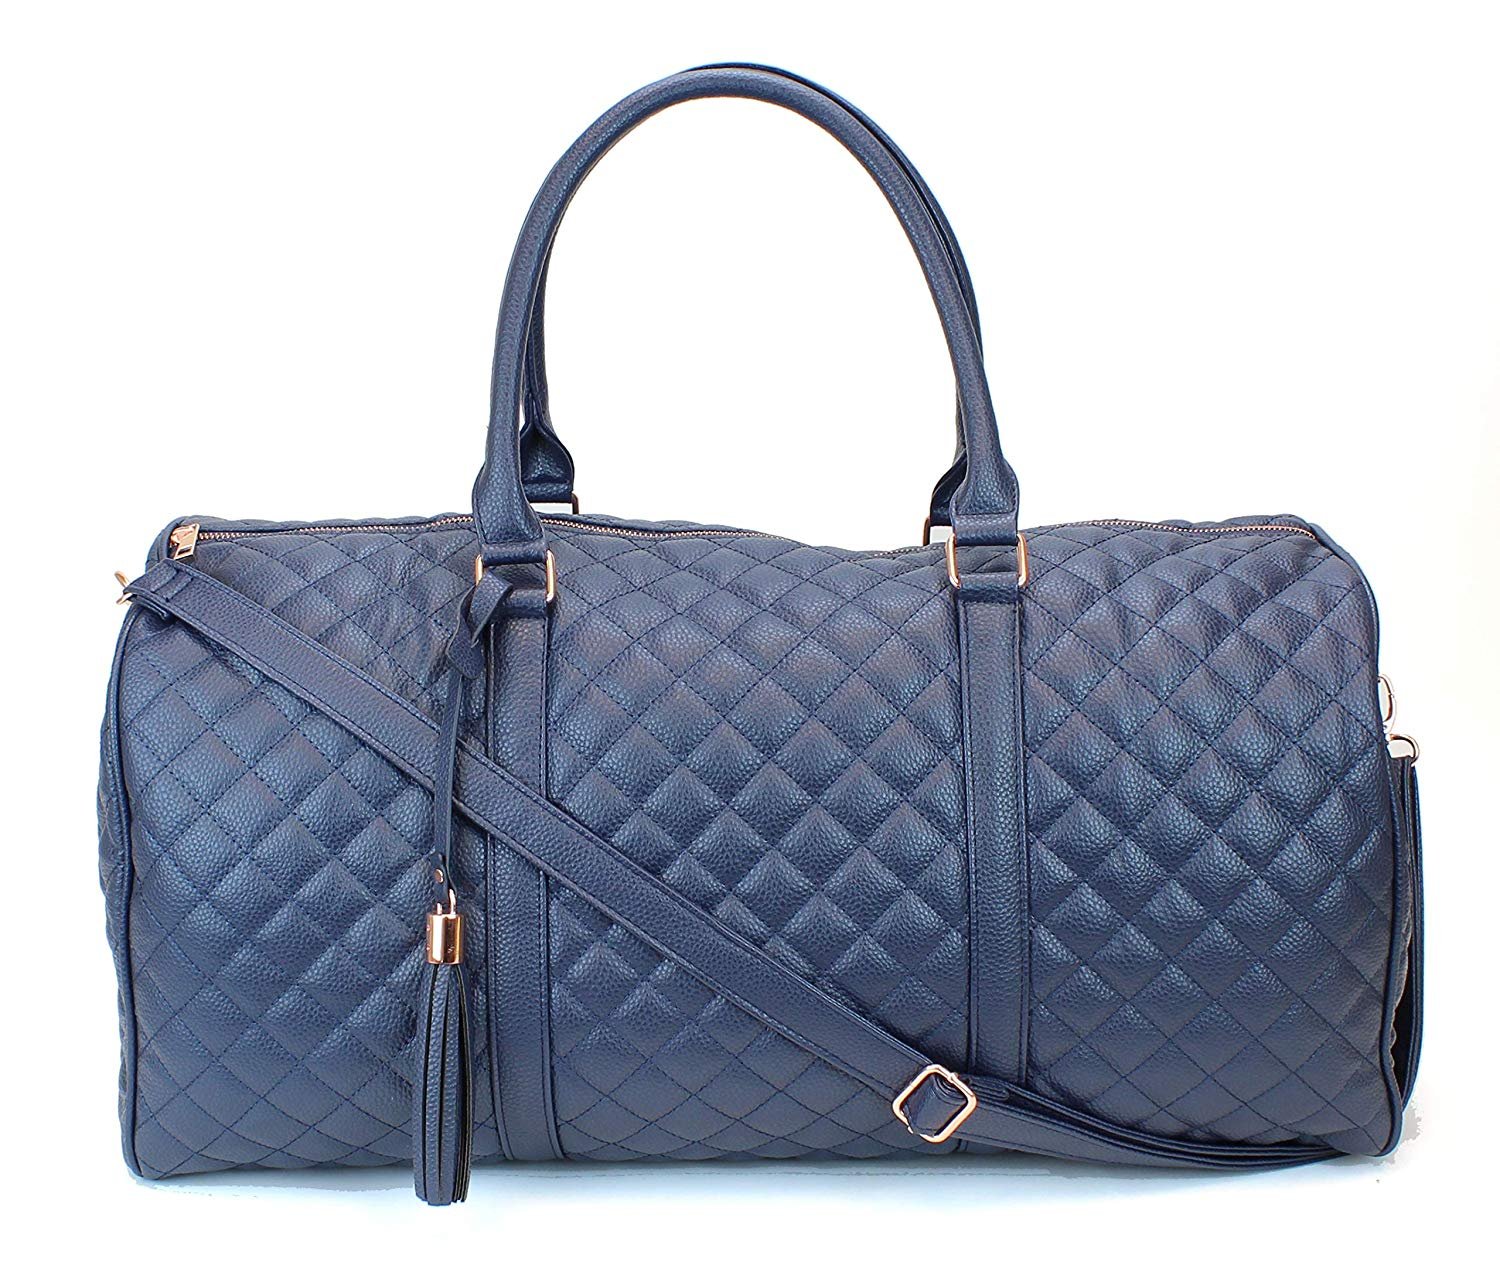 Duffel Leather Blue Duffle Bag, For Travel